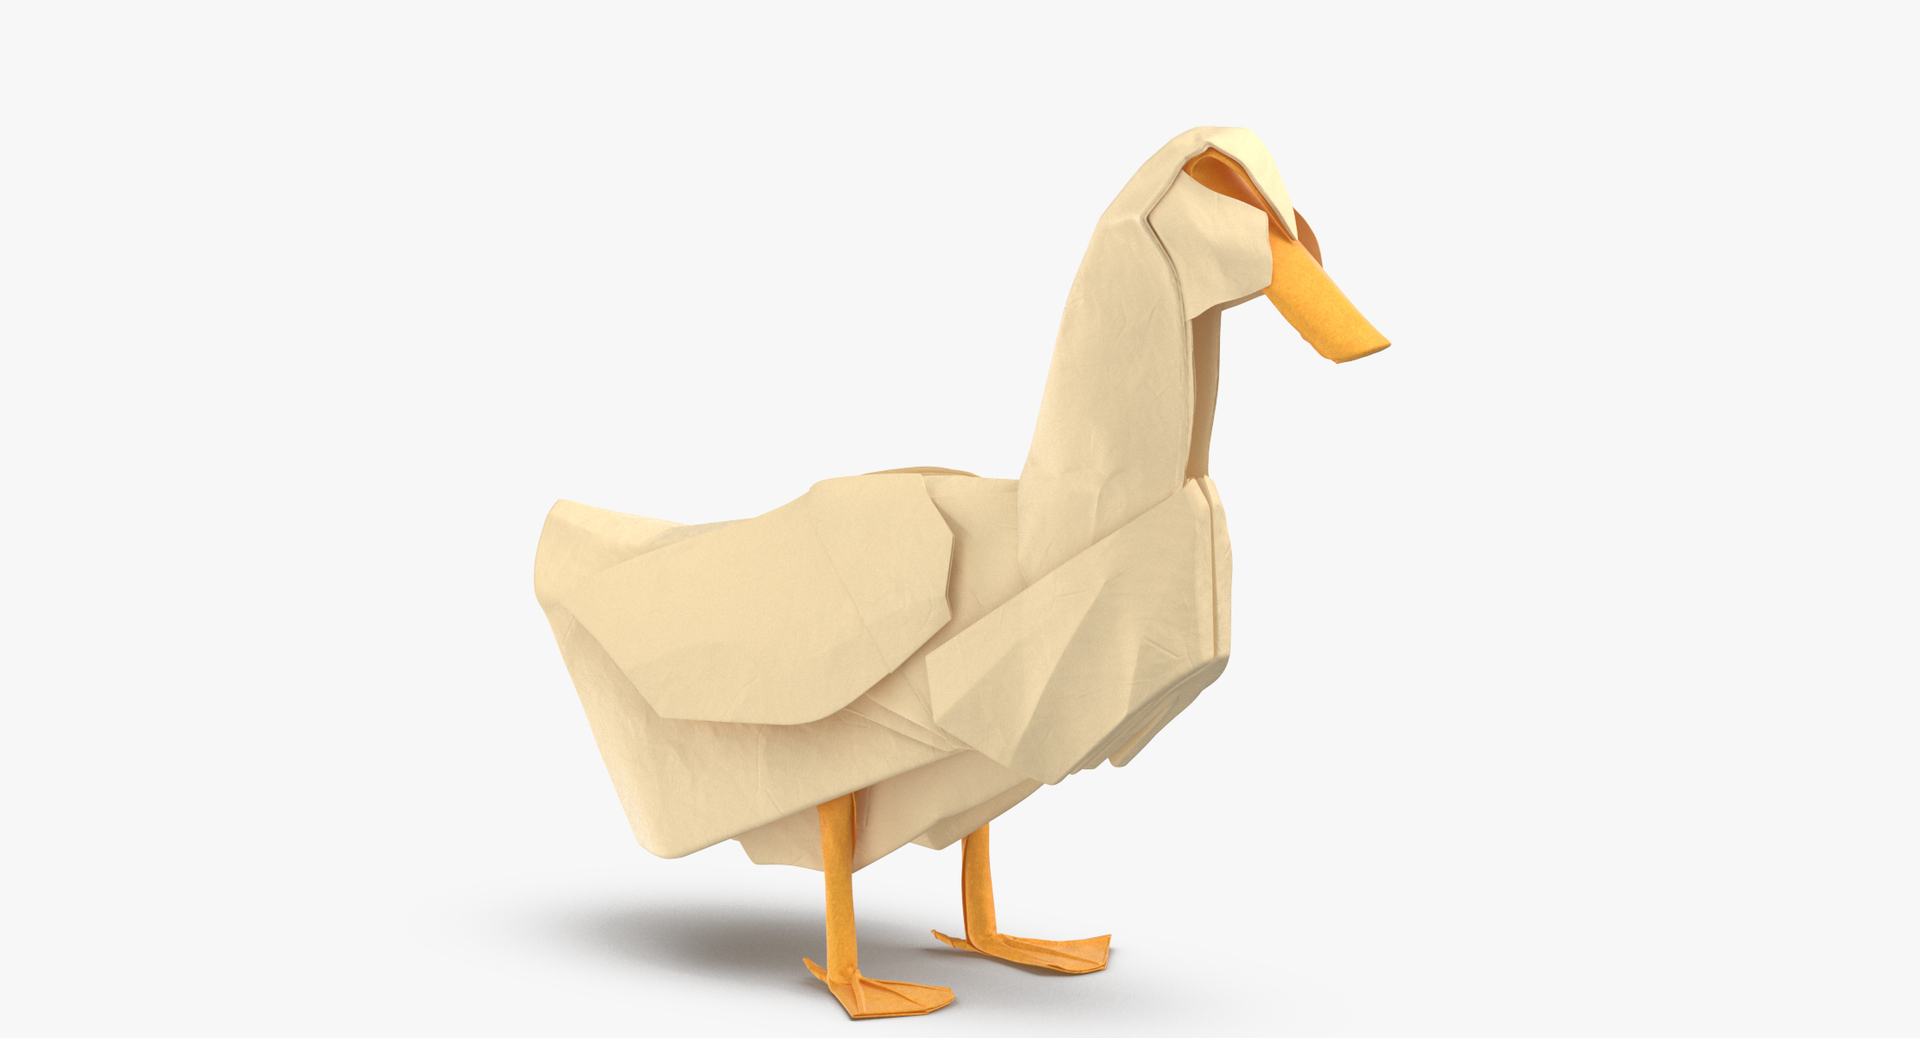 How to make a paper duck  Easy origami duck 